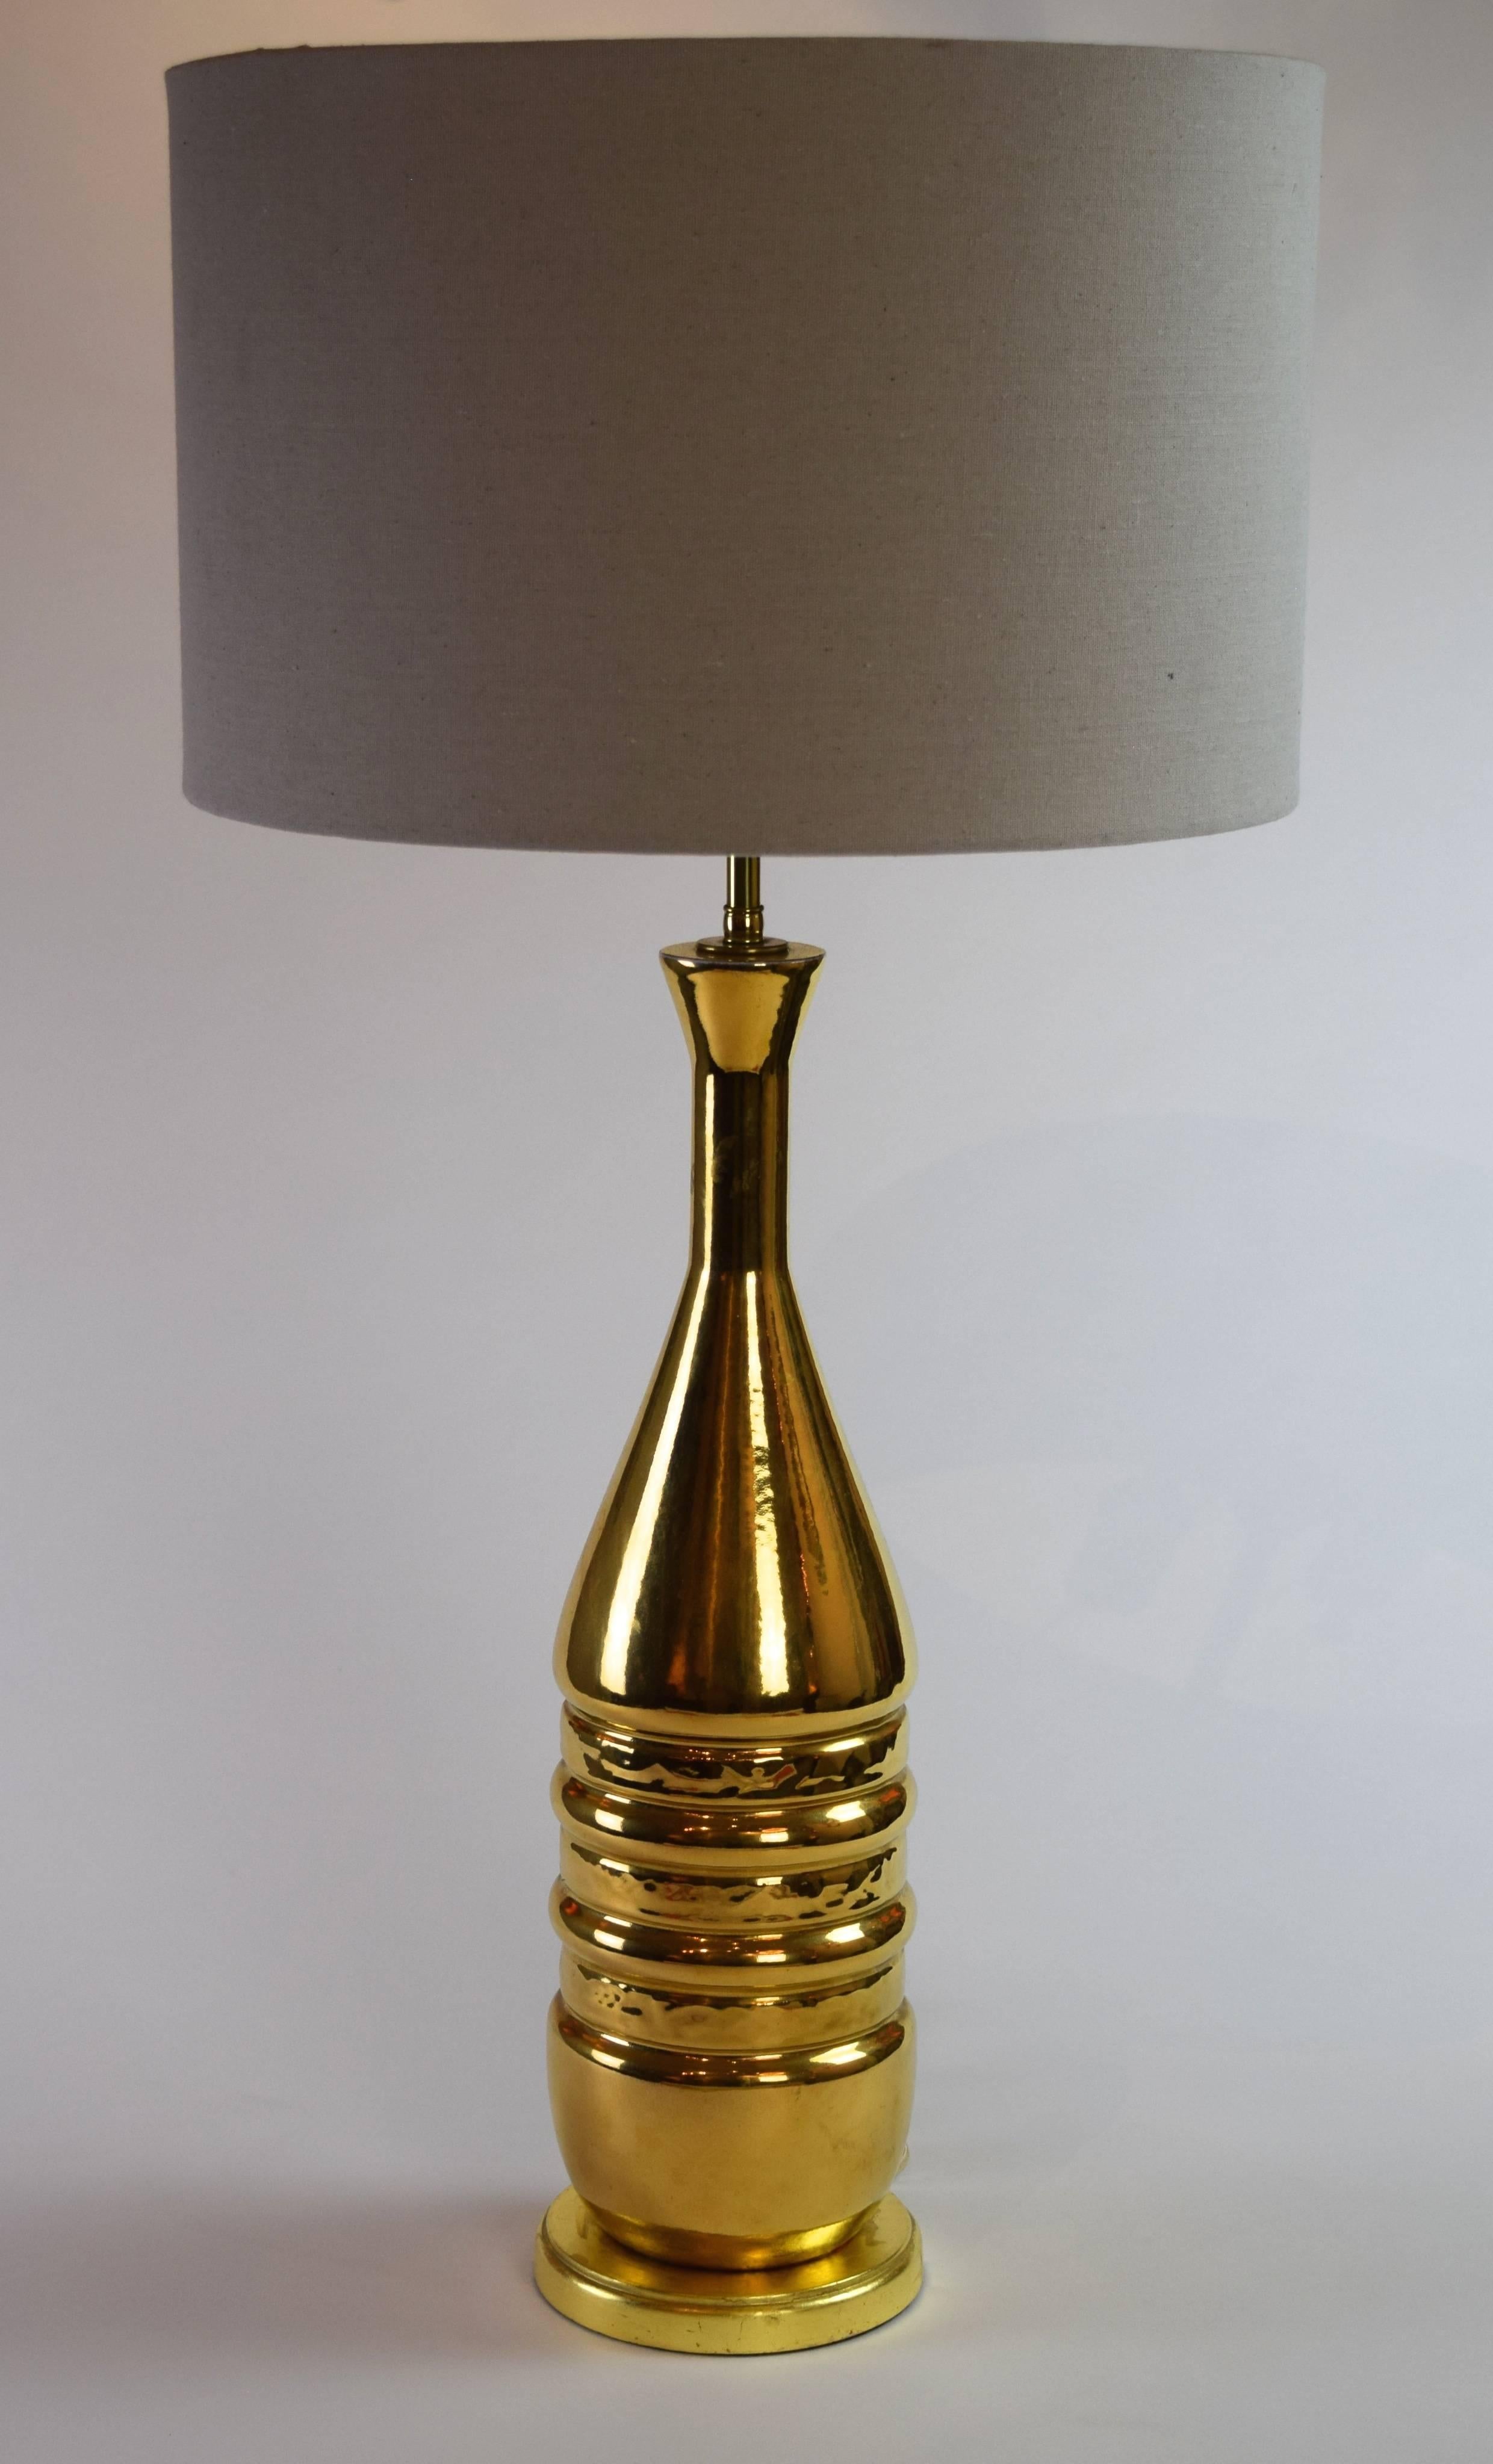 Pair of Tall Mid-Century Modern Gilt Ceramic Lamps For Sale 3